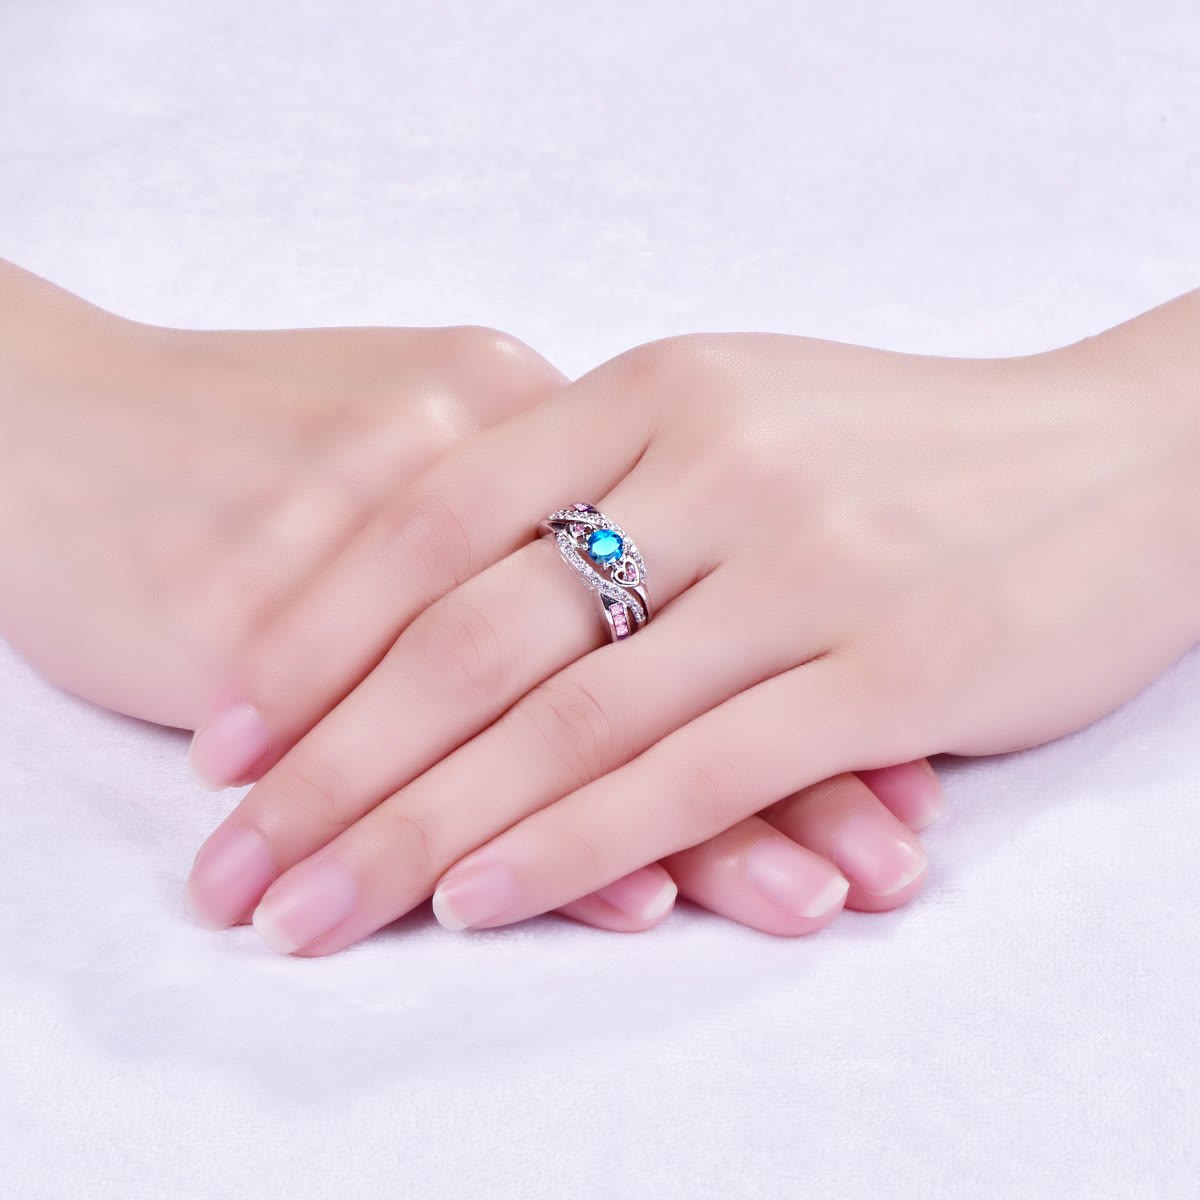 925 Silver Heart Shaped With Colourful Zircon Ring